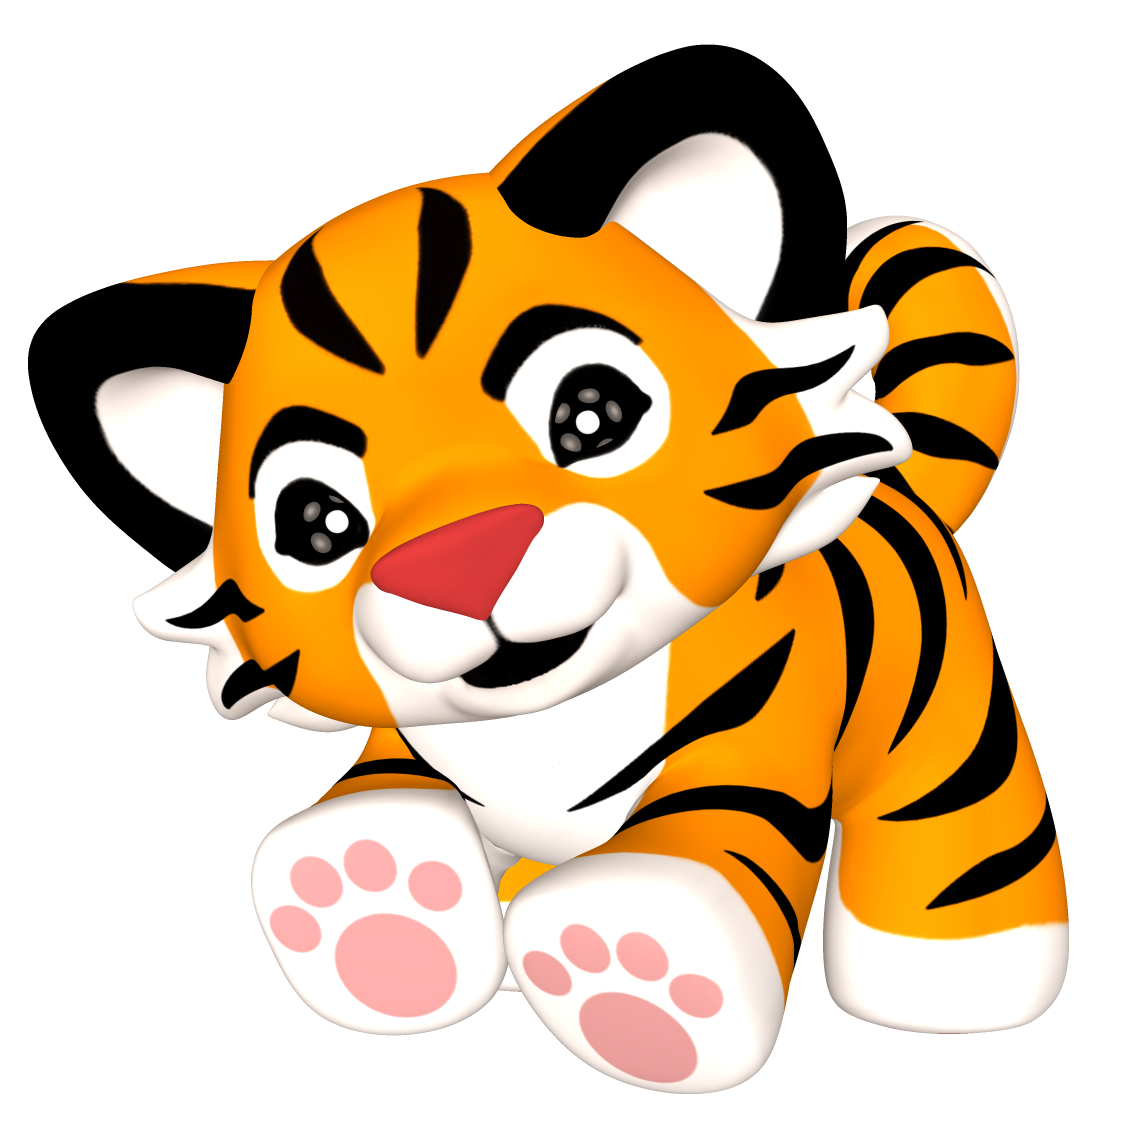 Panther clipart cute baby. Free tiger at getdrawings